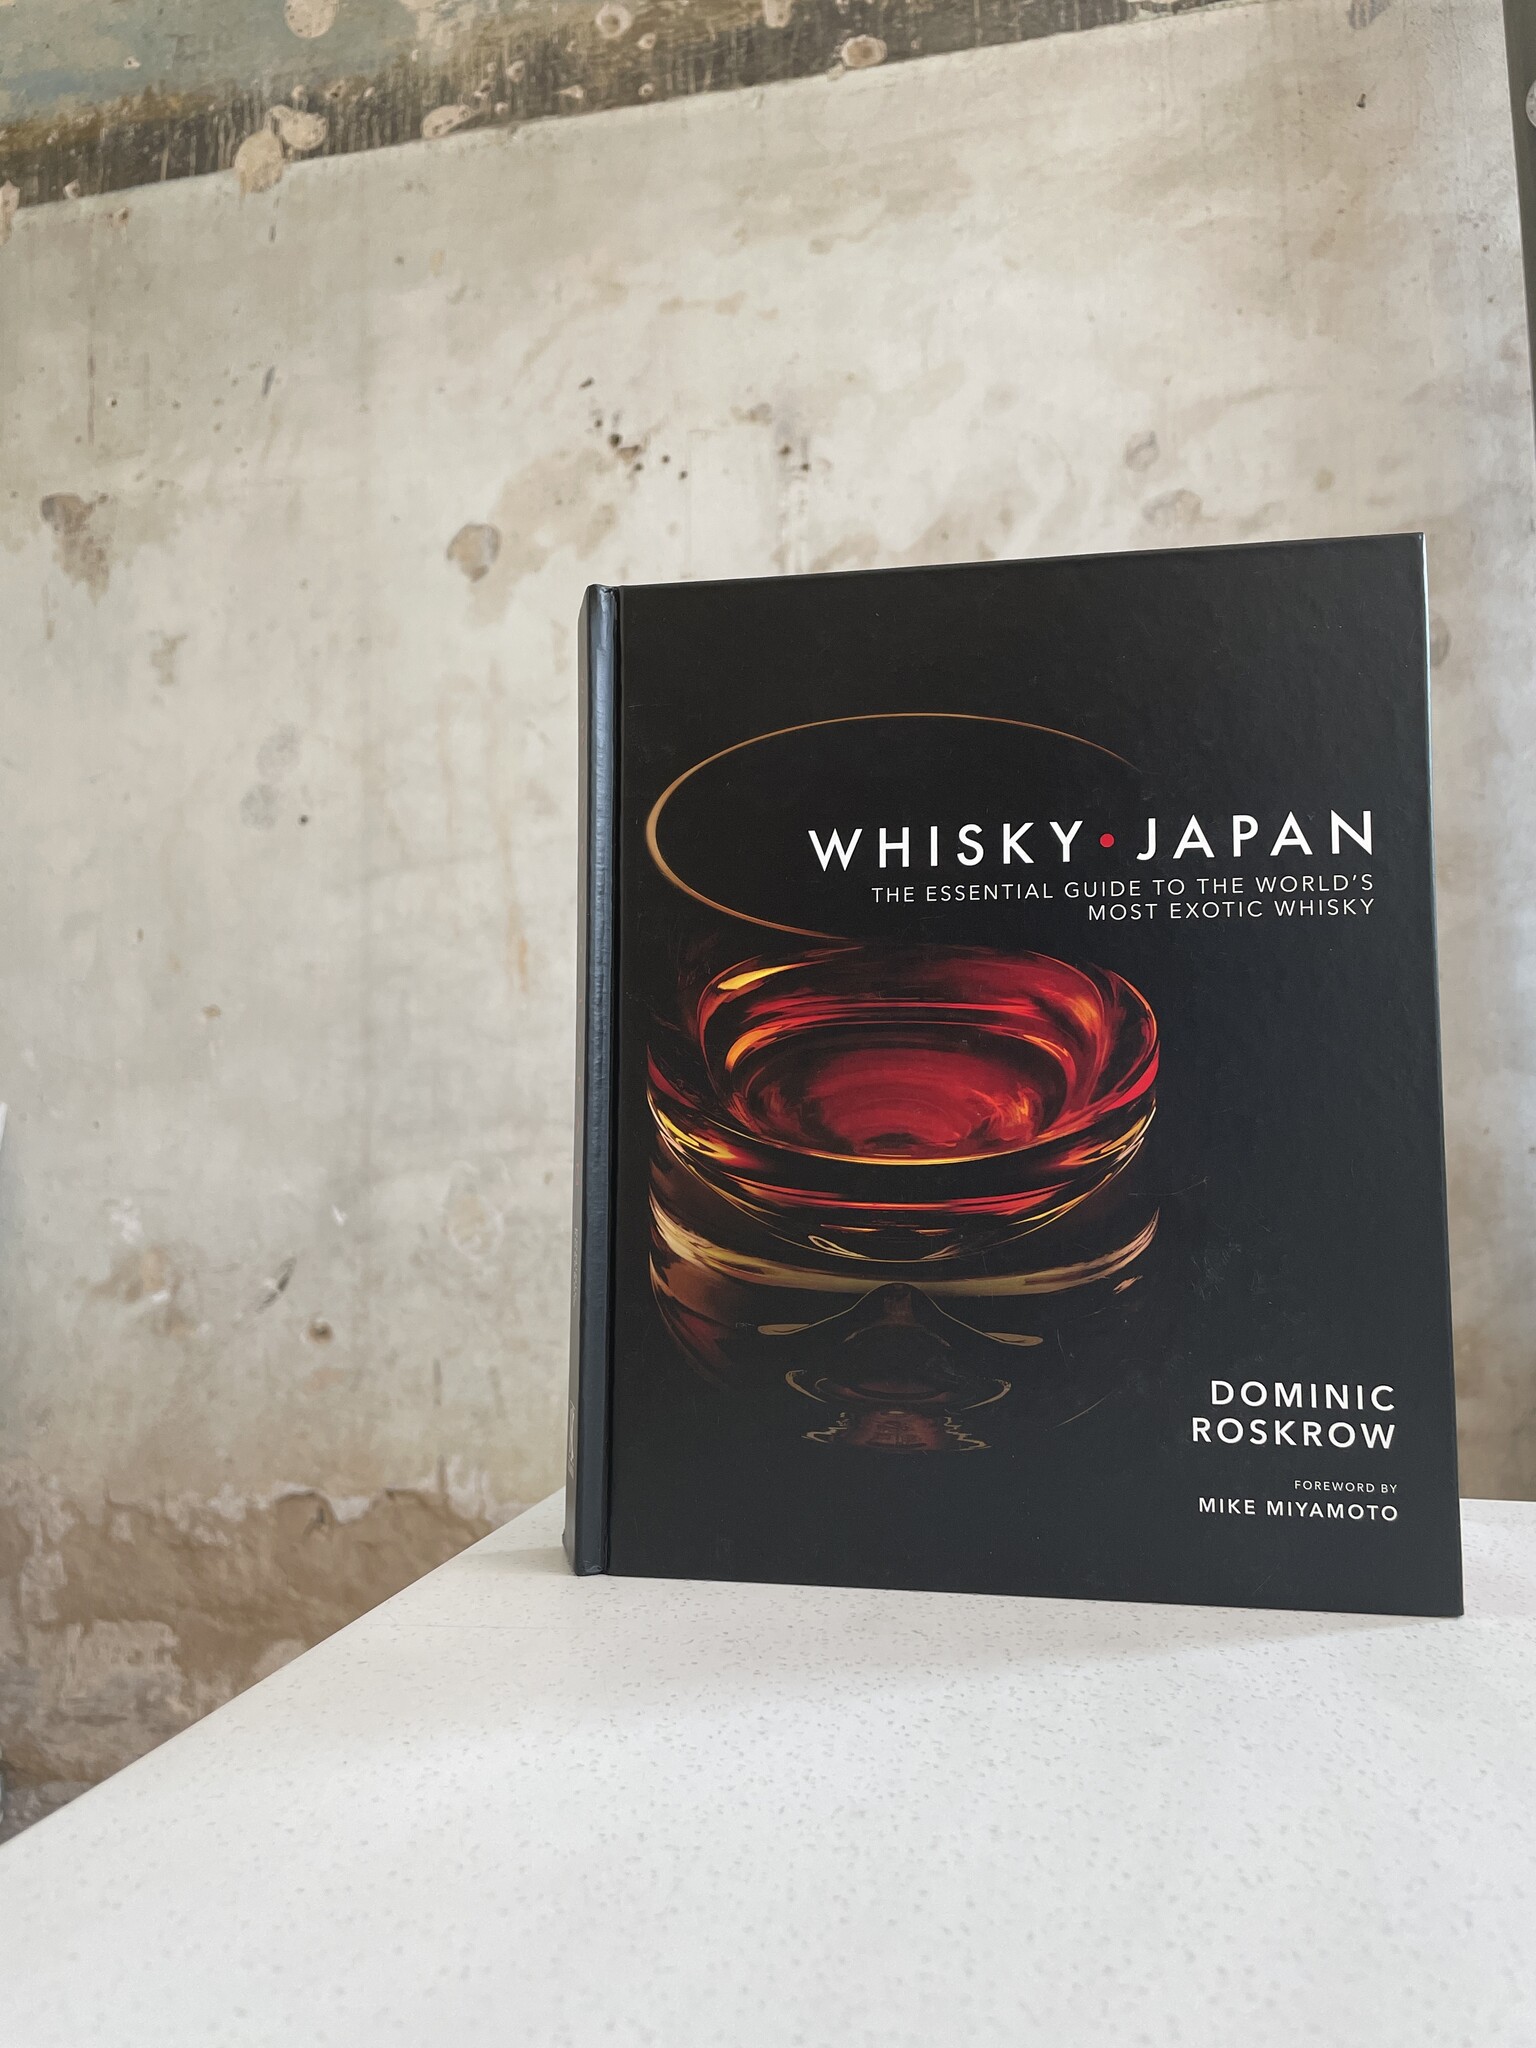 Whisky Japan: The Essential Guide to The World's Most Exotic Whisky